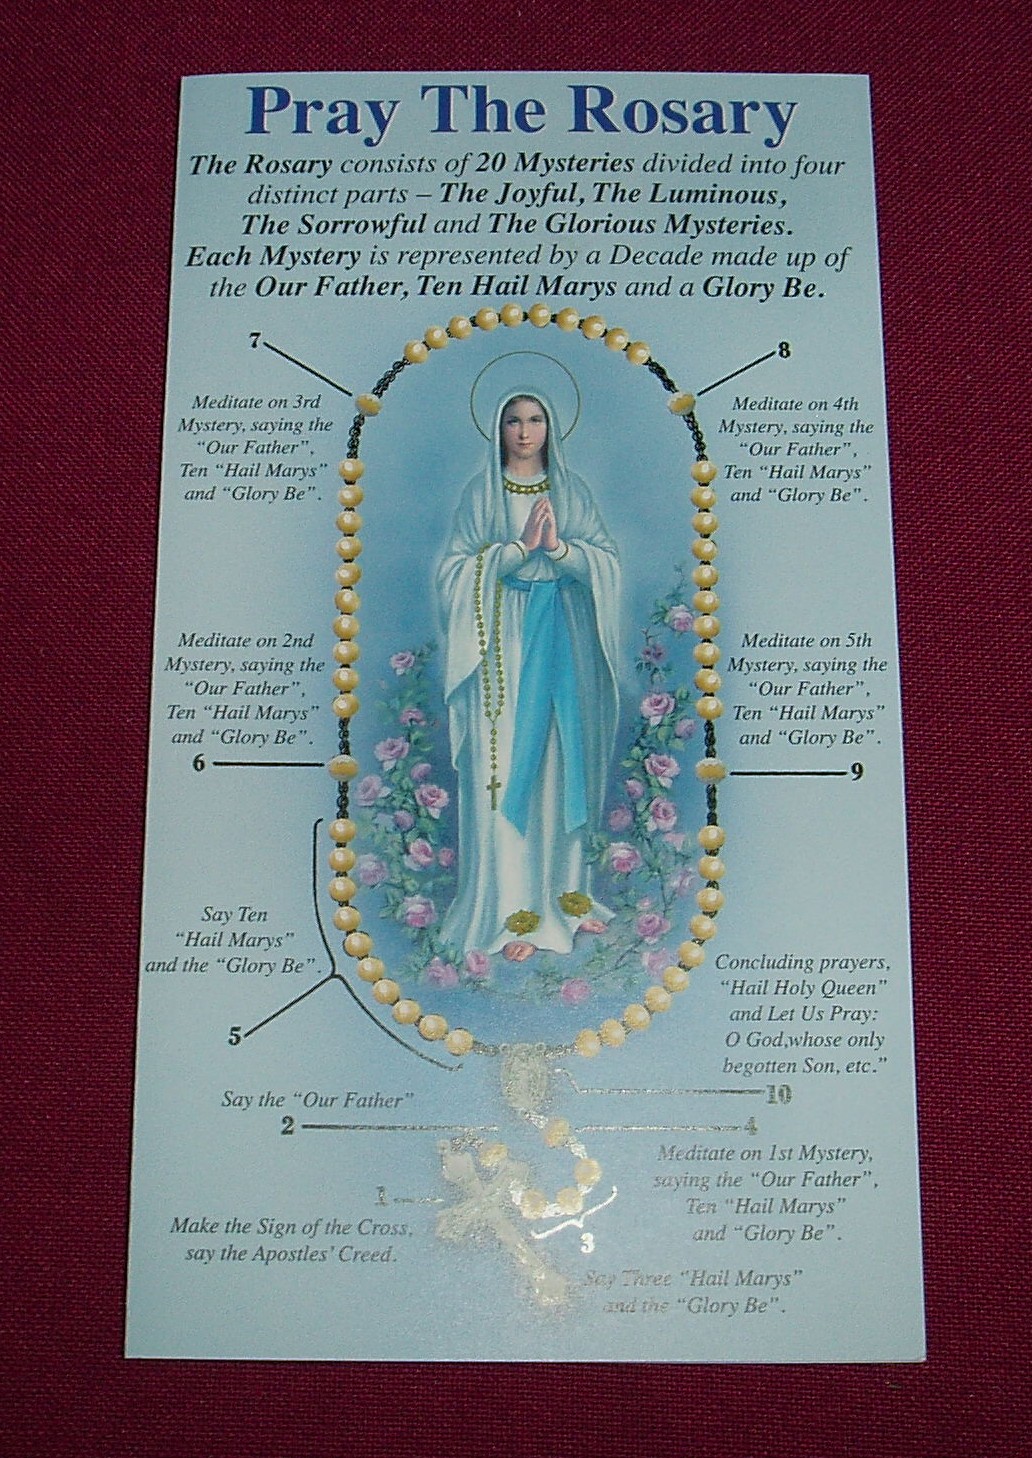 Praying the Rosary Leaflet | Southern Cross Church Supplies